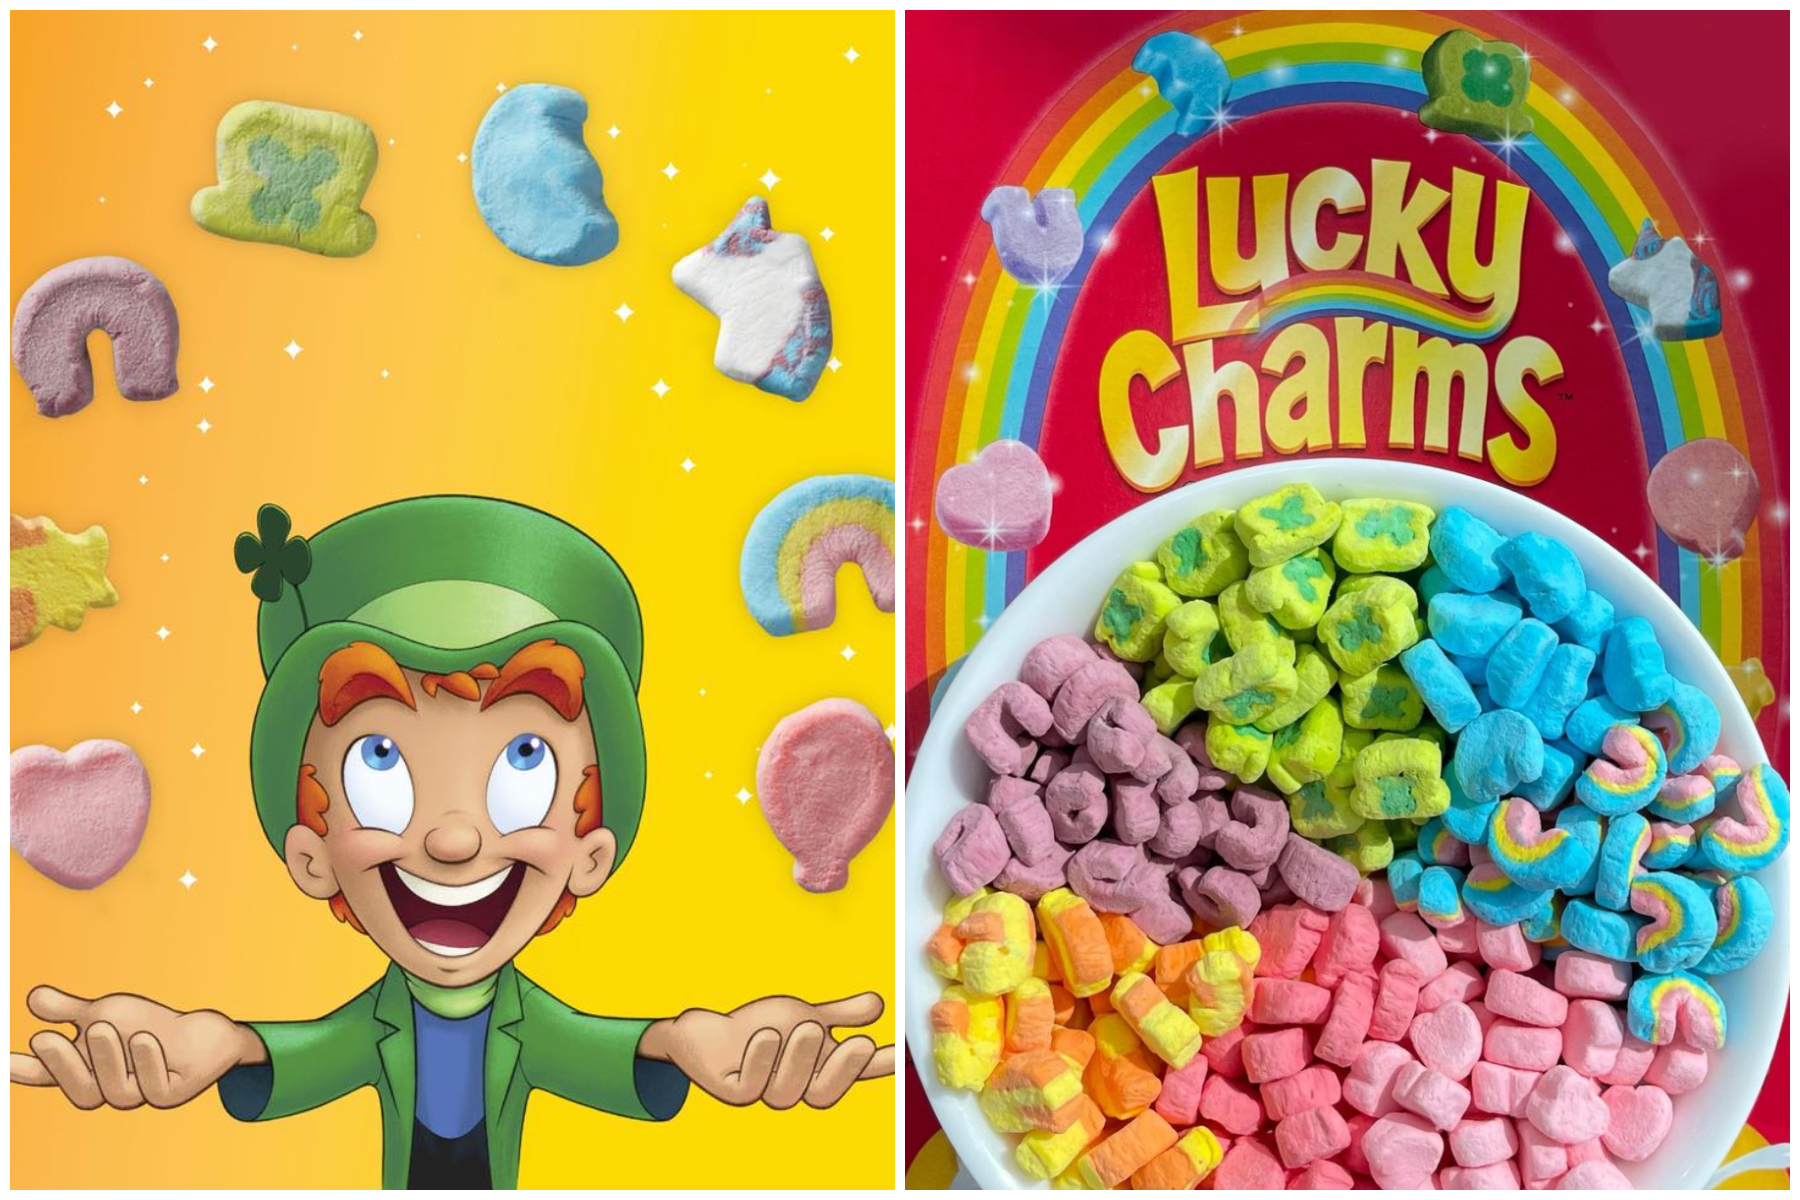 Cereal mascots